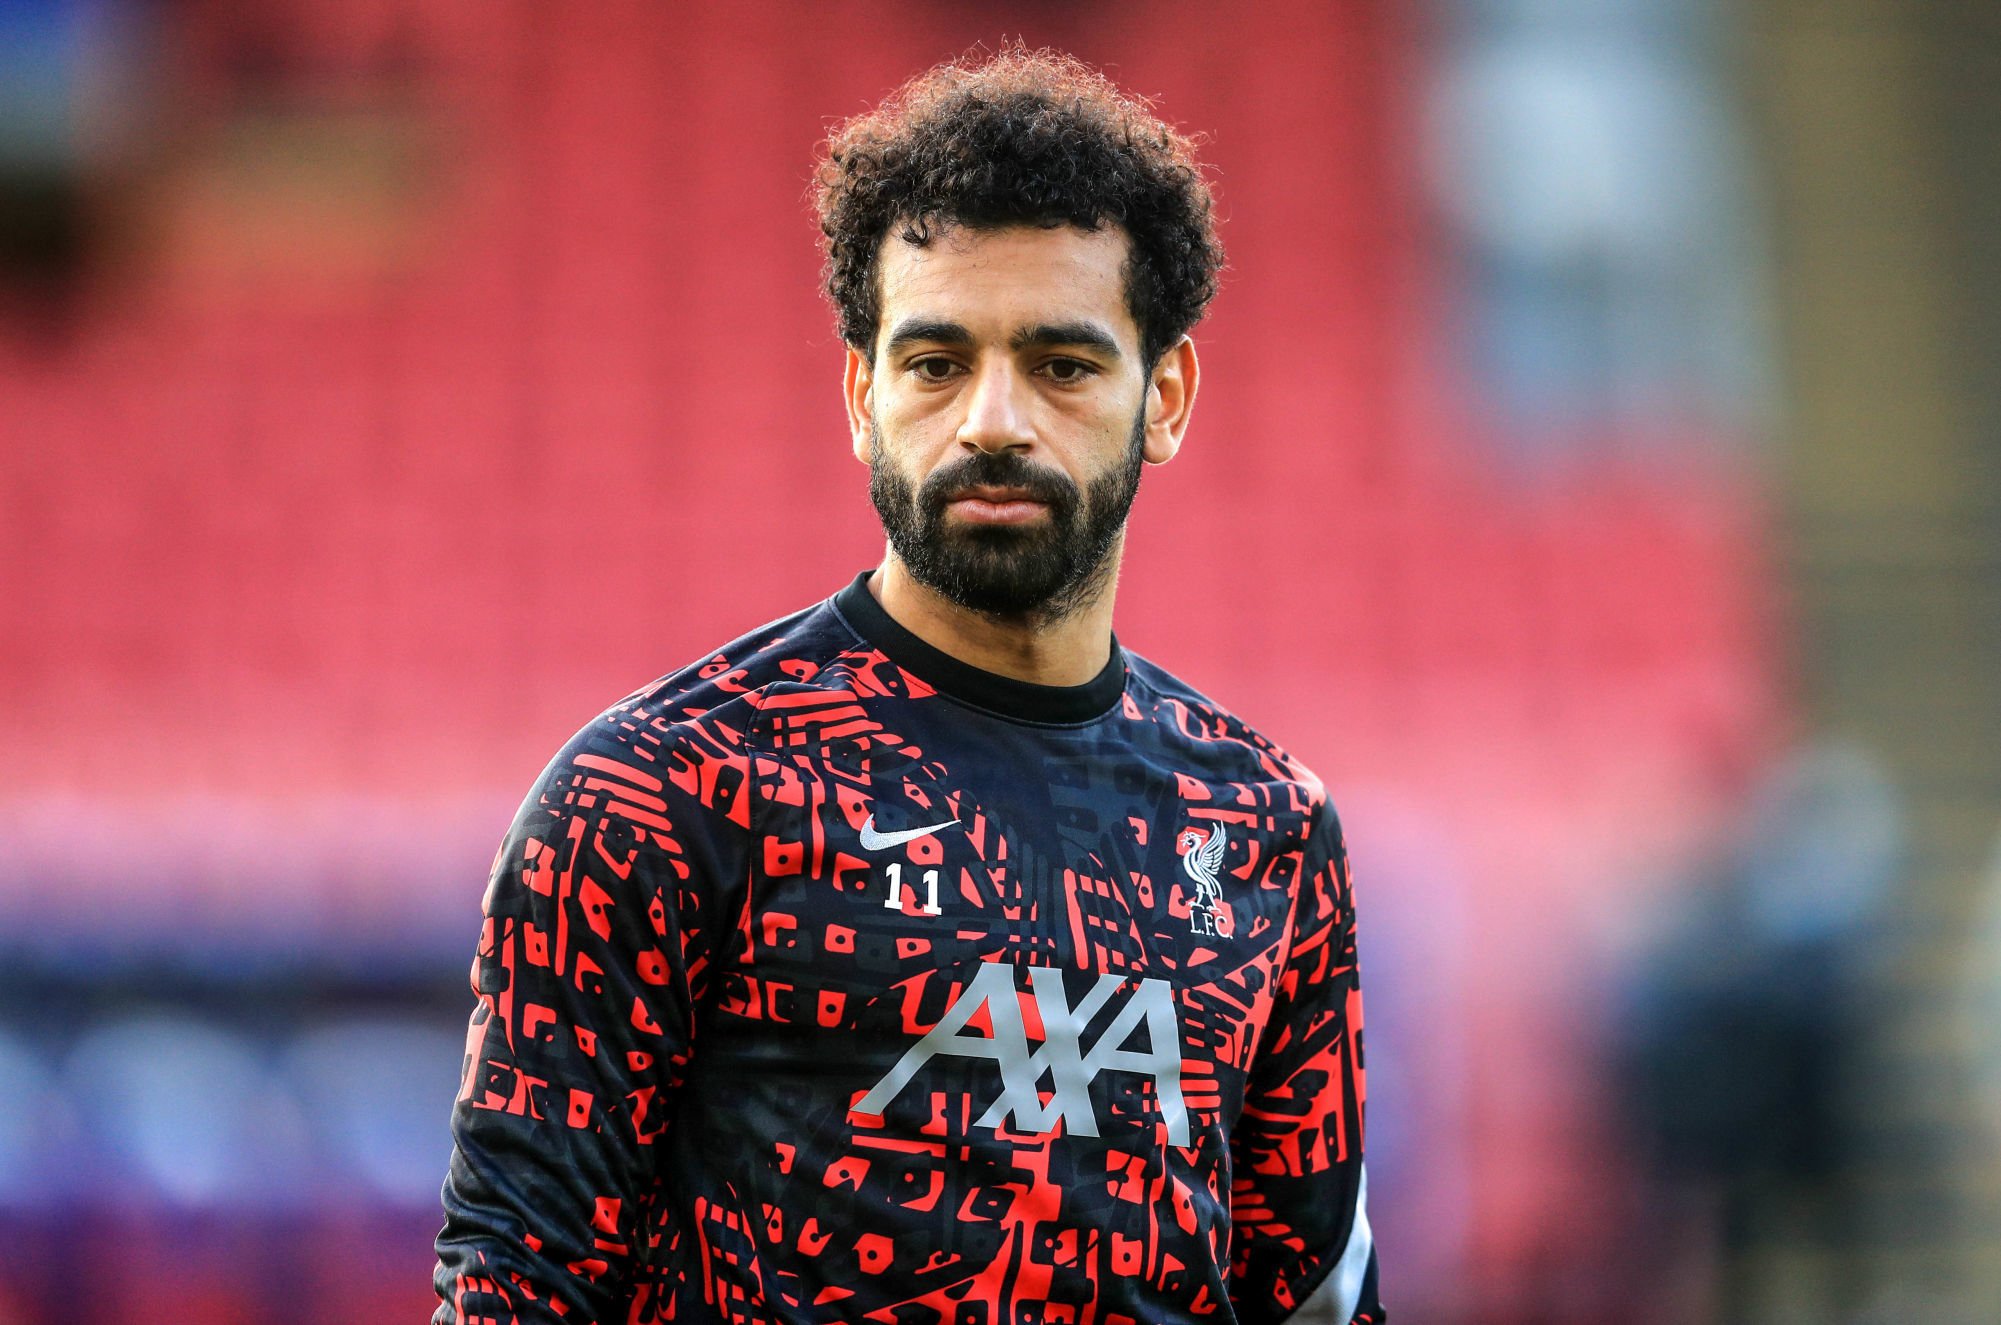 Mohamed Salah: It saddens me that I will not participate in Qatar 2022